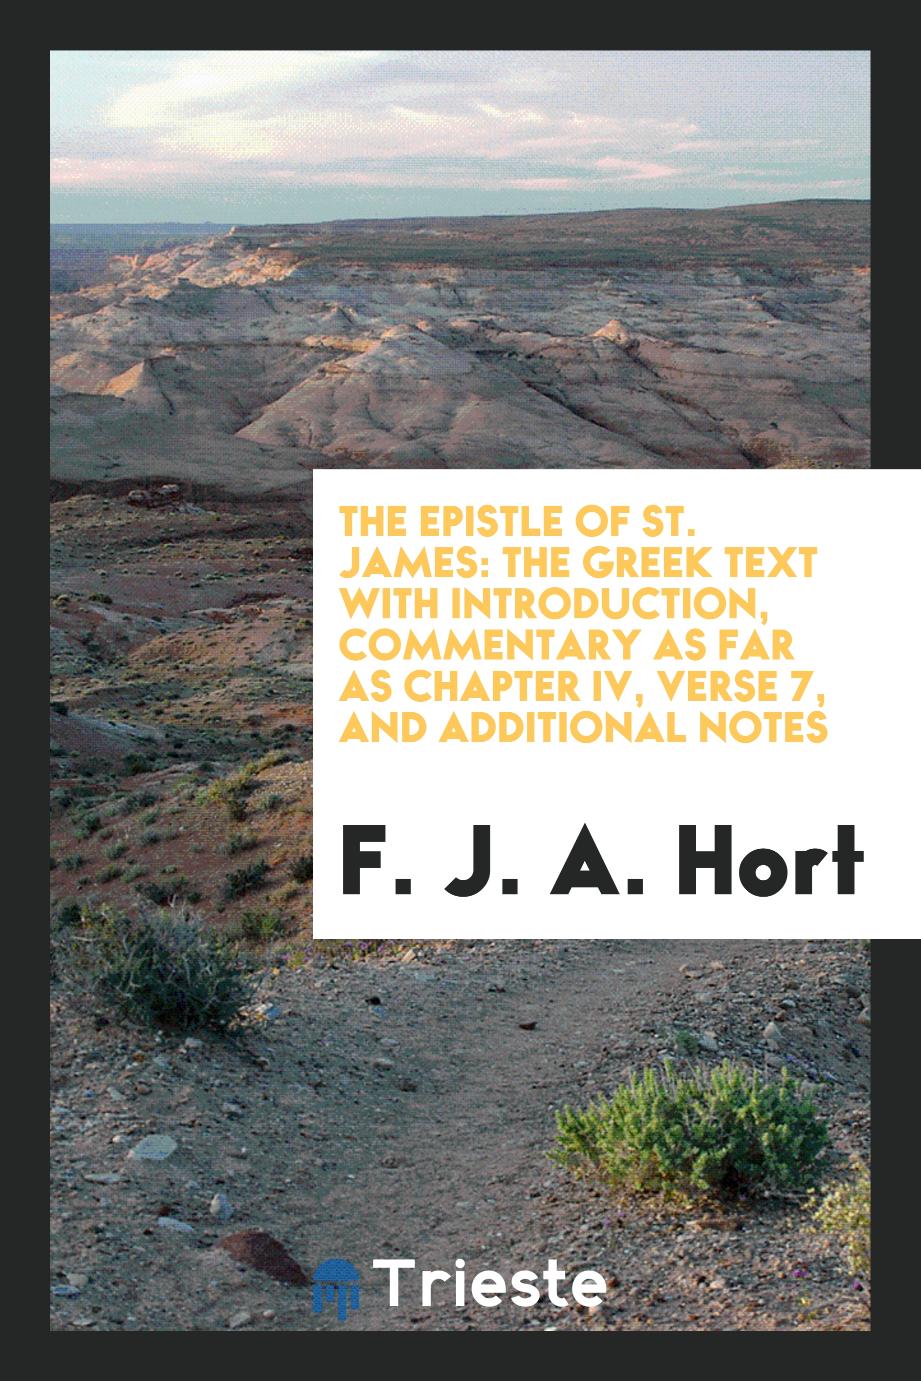 The Epistle of St. James: the Greek text with introduction, commentary as far as chapter IV, verse 7, and additional notes